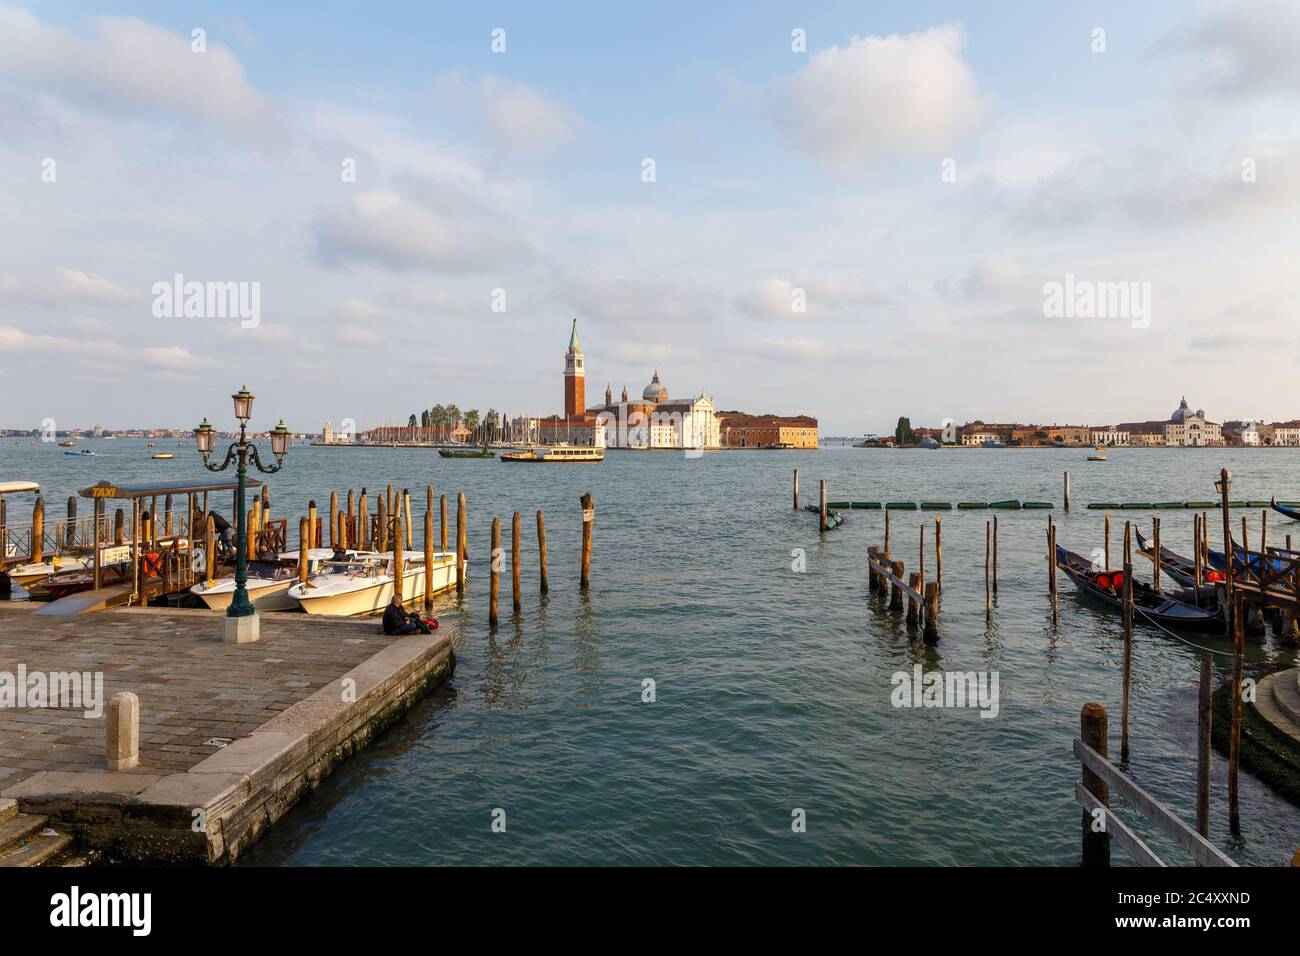 Venice, Italy - CIRCA 2020: View of an empty water canal in Venice Italy. Concept of the effects of lock down due to CoronaVirus COVID-19. Picturesque Stock Photo